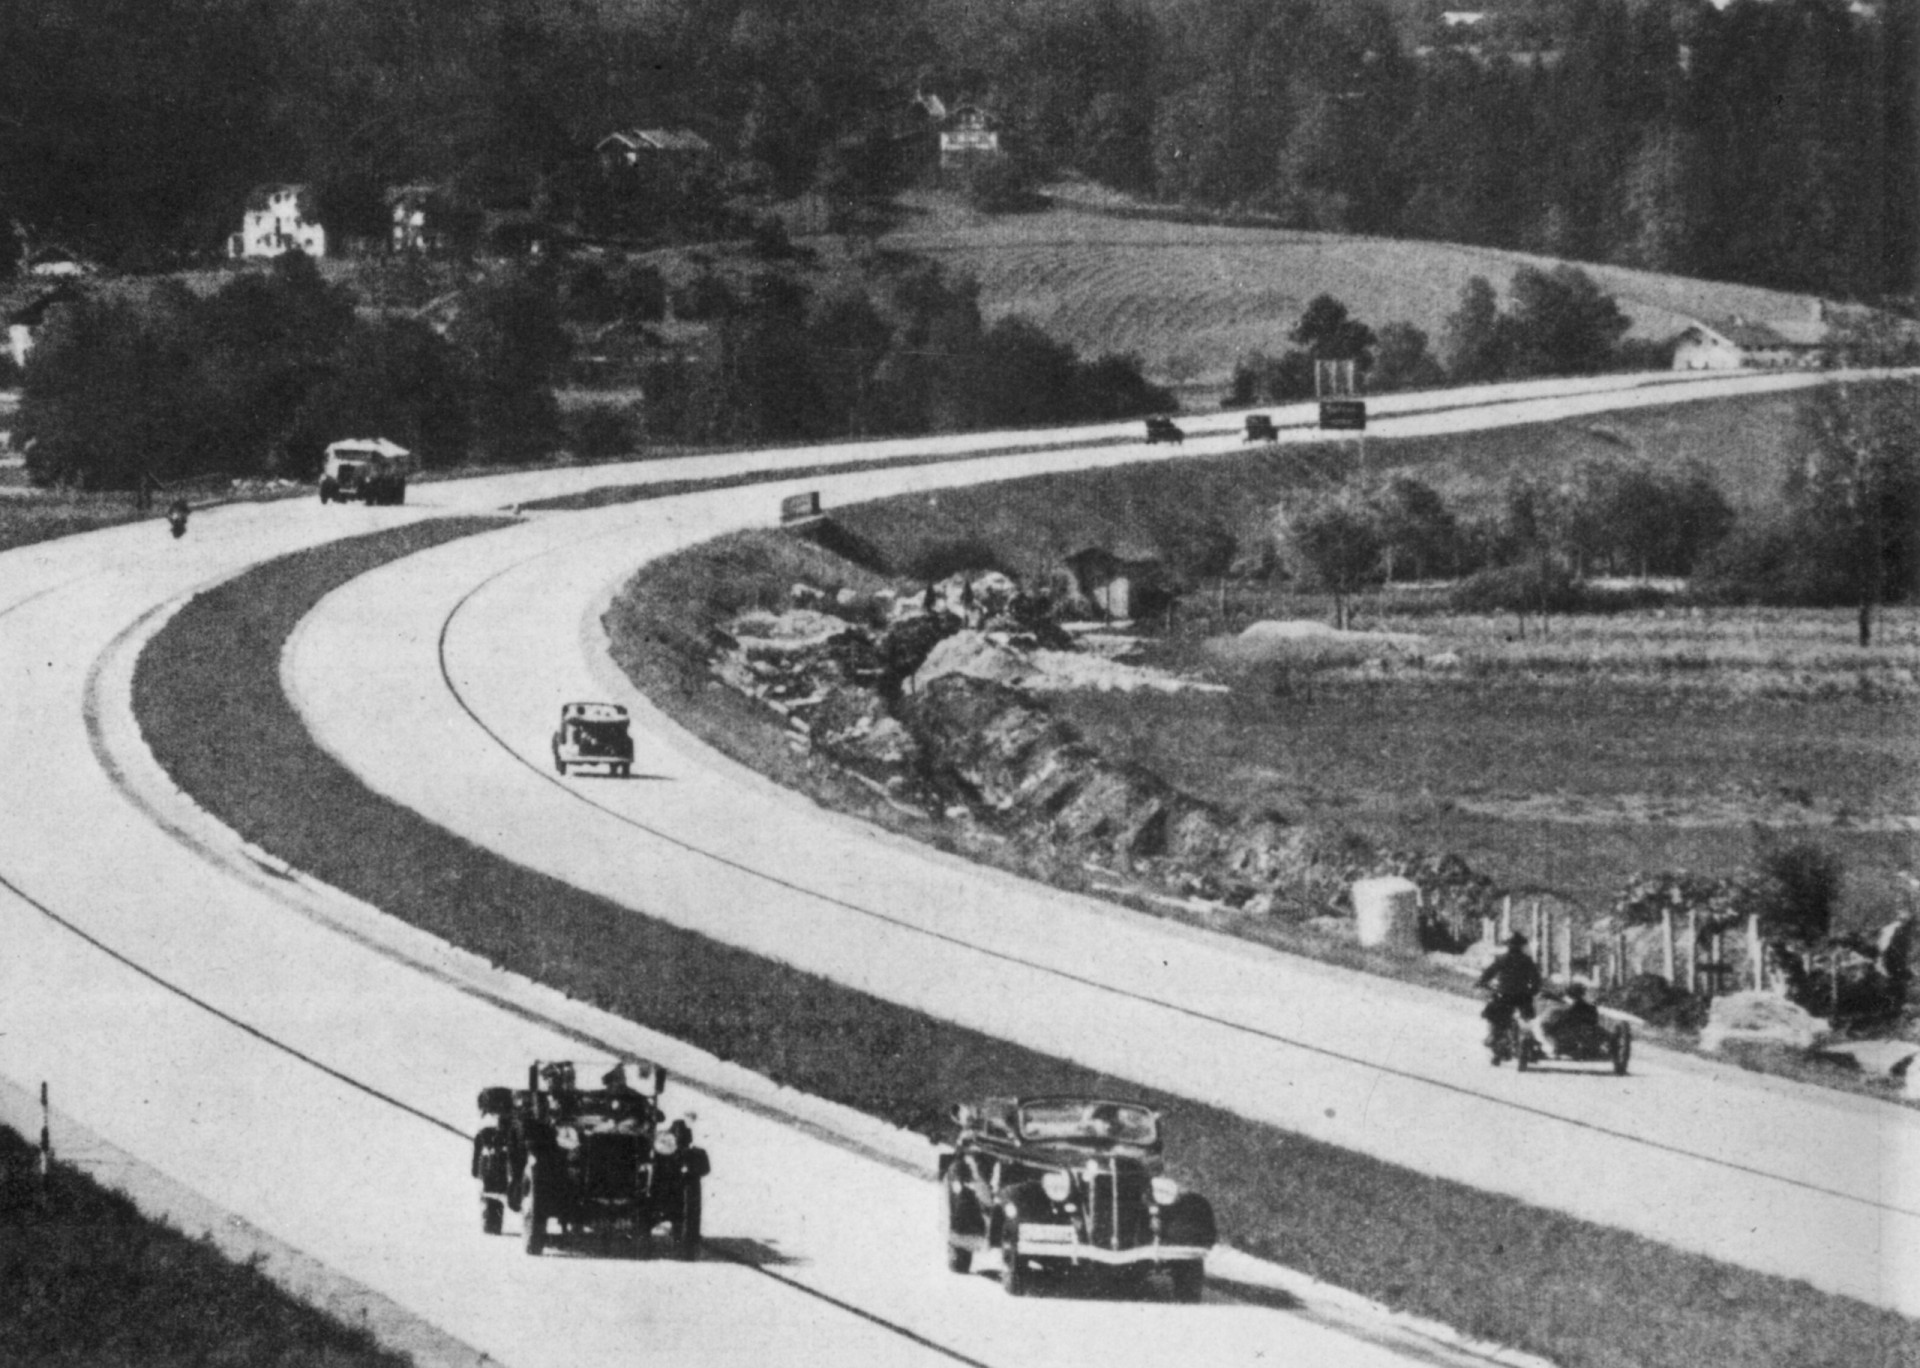 <p>The ambitious program of building the autobahn network not only improved Germany's transport infrastructure, it created 100,000 jobs and was a propaganda coup.</p><p>You may also like:<a href="https://www.starsinsider.com/n/308162?utm_source=msn.com&utm_medium=display&utm_campaign=referral_description&utm_content=697904en-us"> Least safe airlines in the world</a></p>